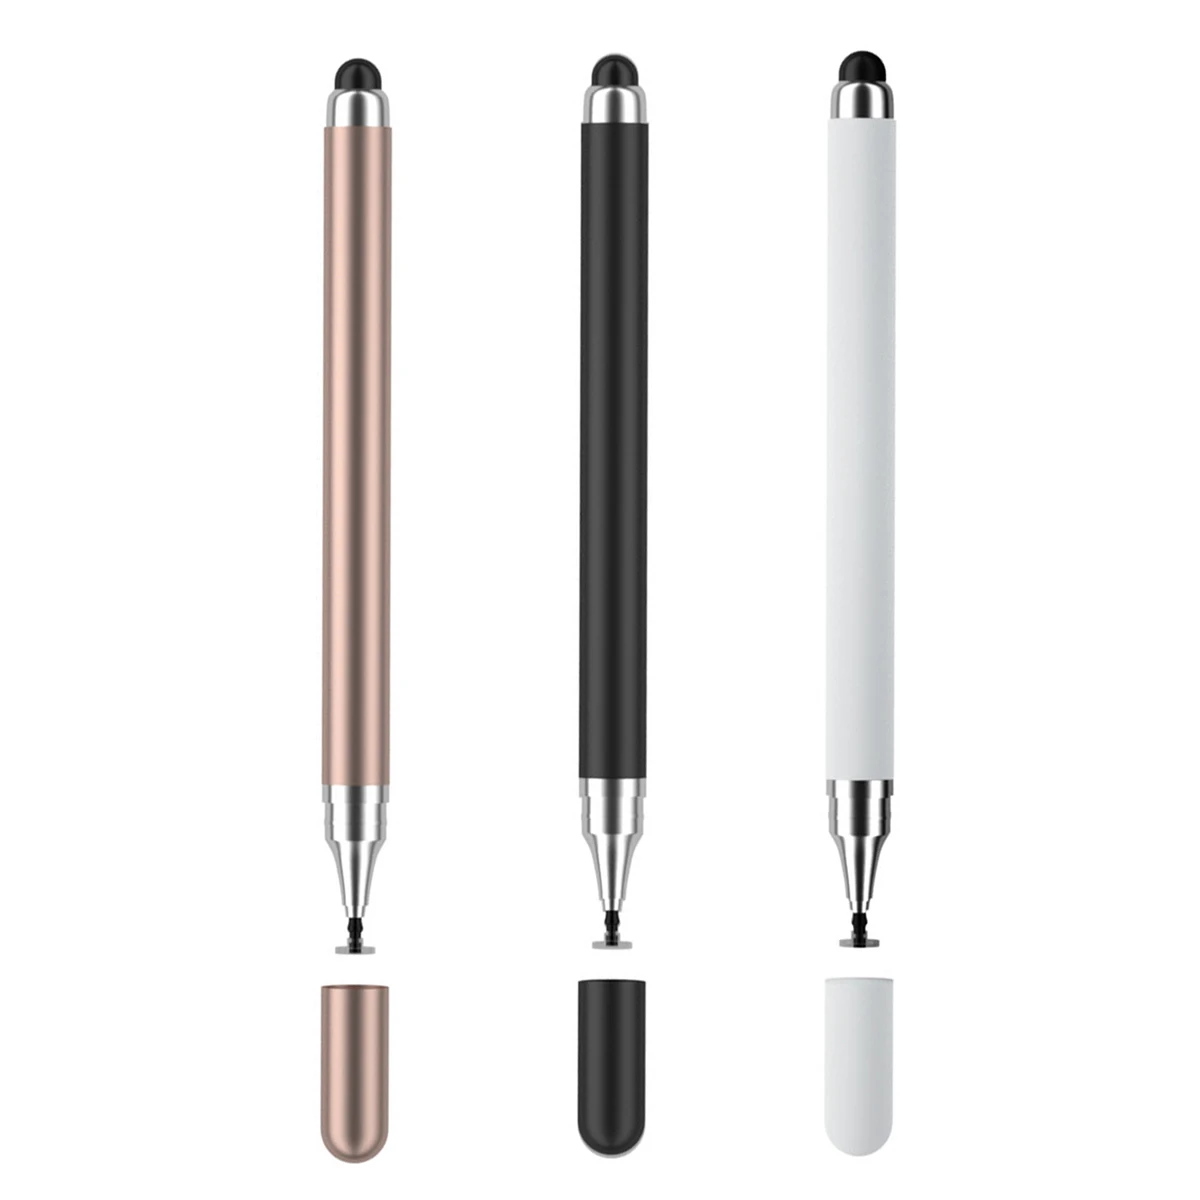 2 in 1 Universal Stylus Pen for ios Android Tablet Mobile Phone for iPad Accessories Drawing Tablet Capacitive Screen Touch Pen images - 6